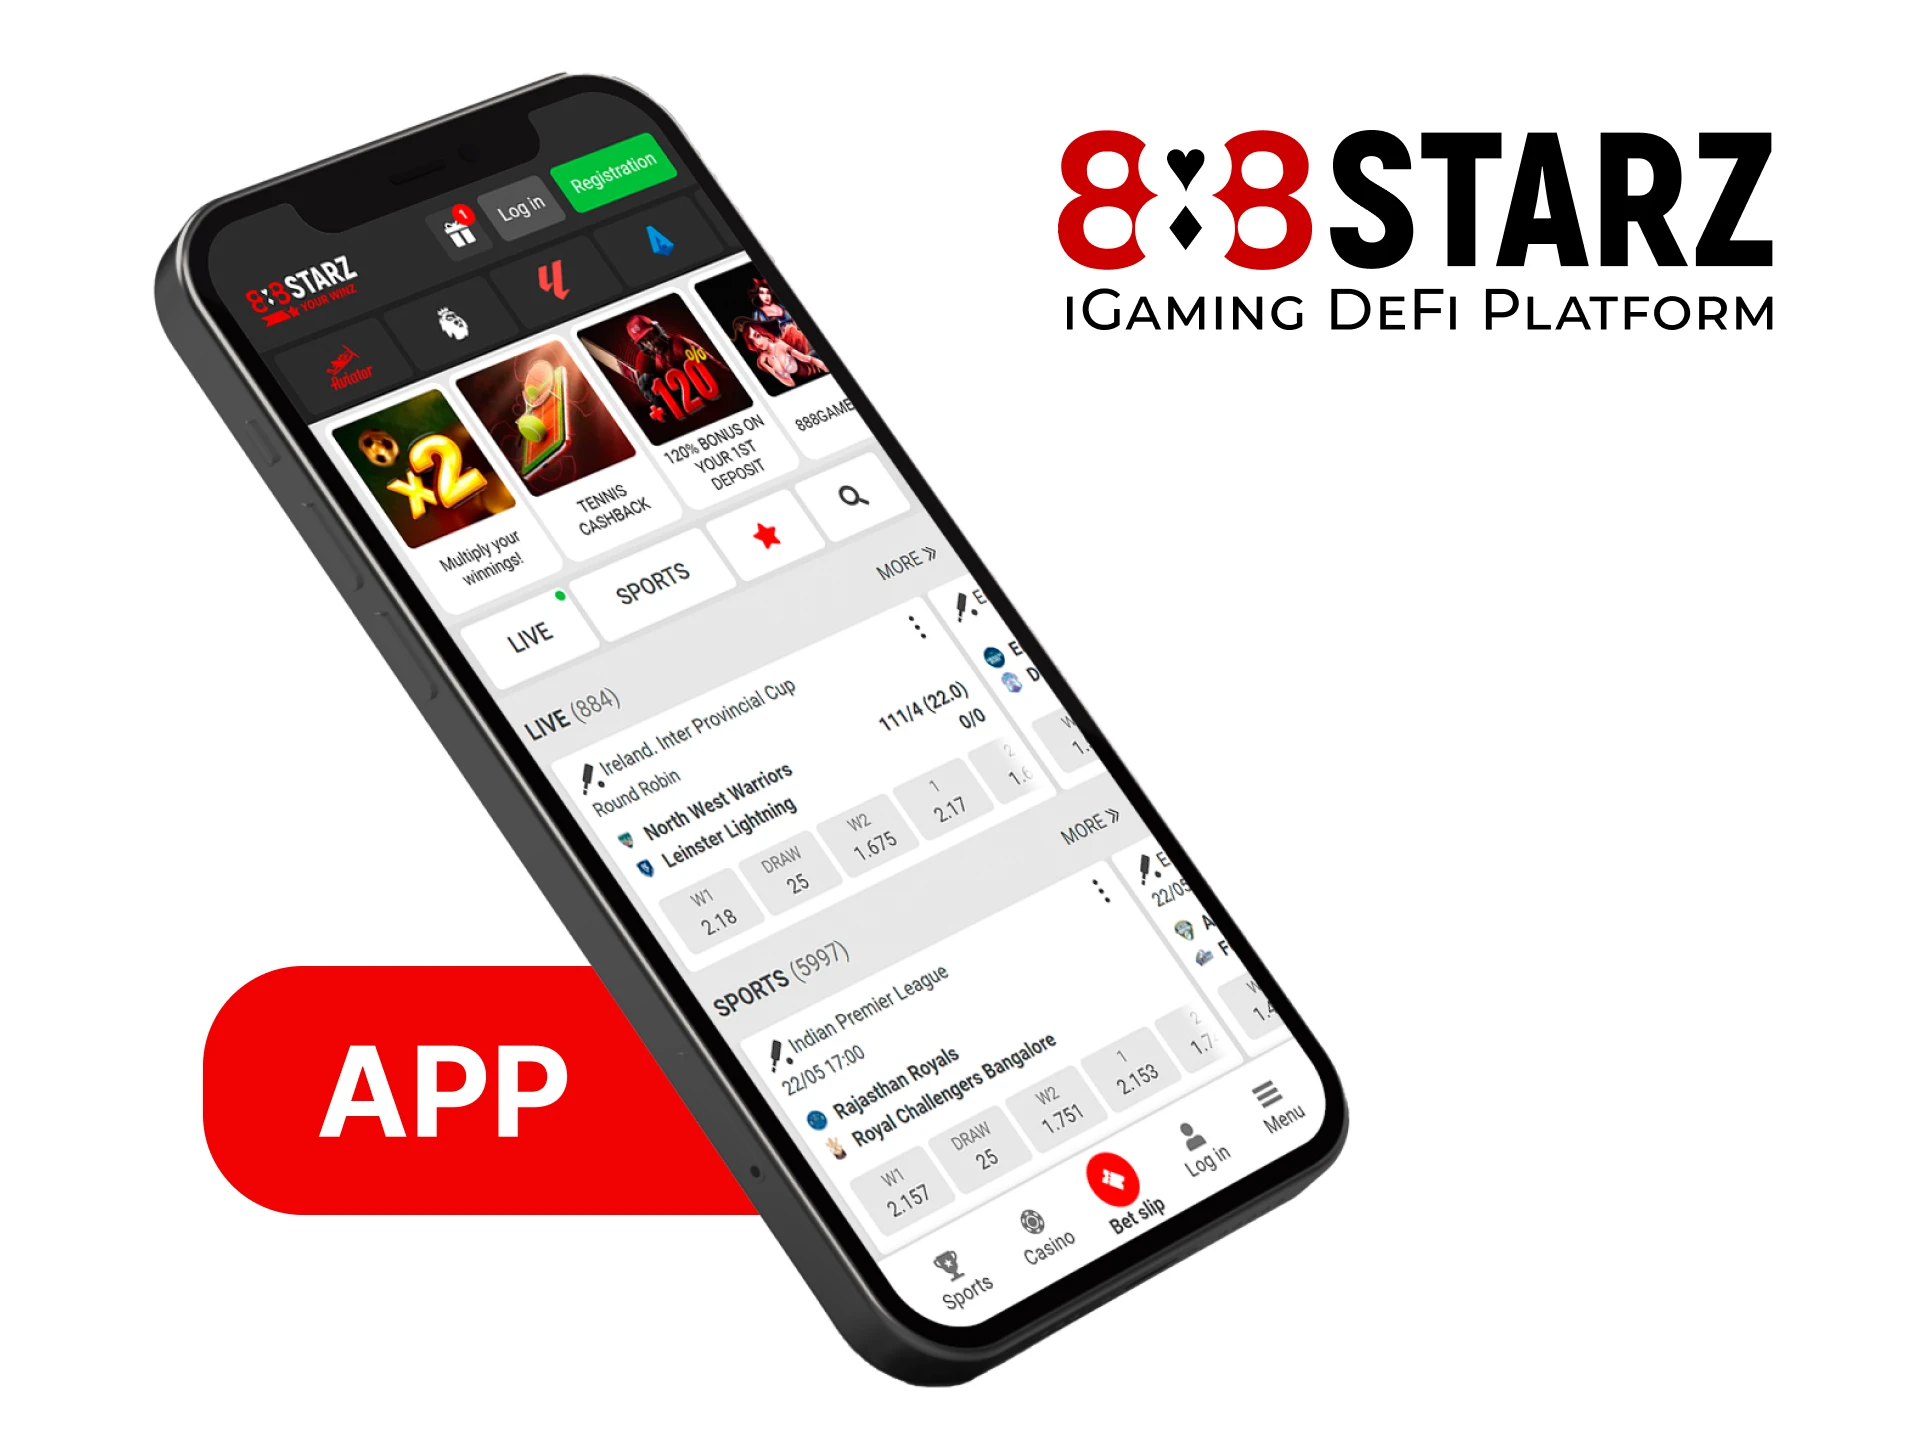 Download the 888starz app and place bets on cricket matches quickly and conveniently.